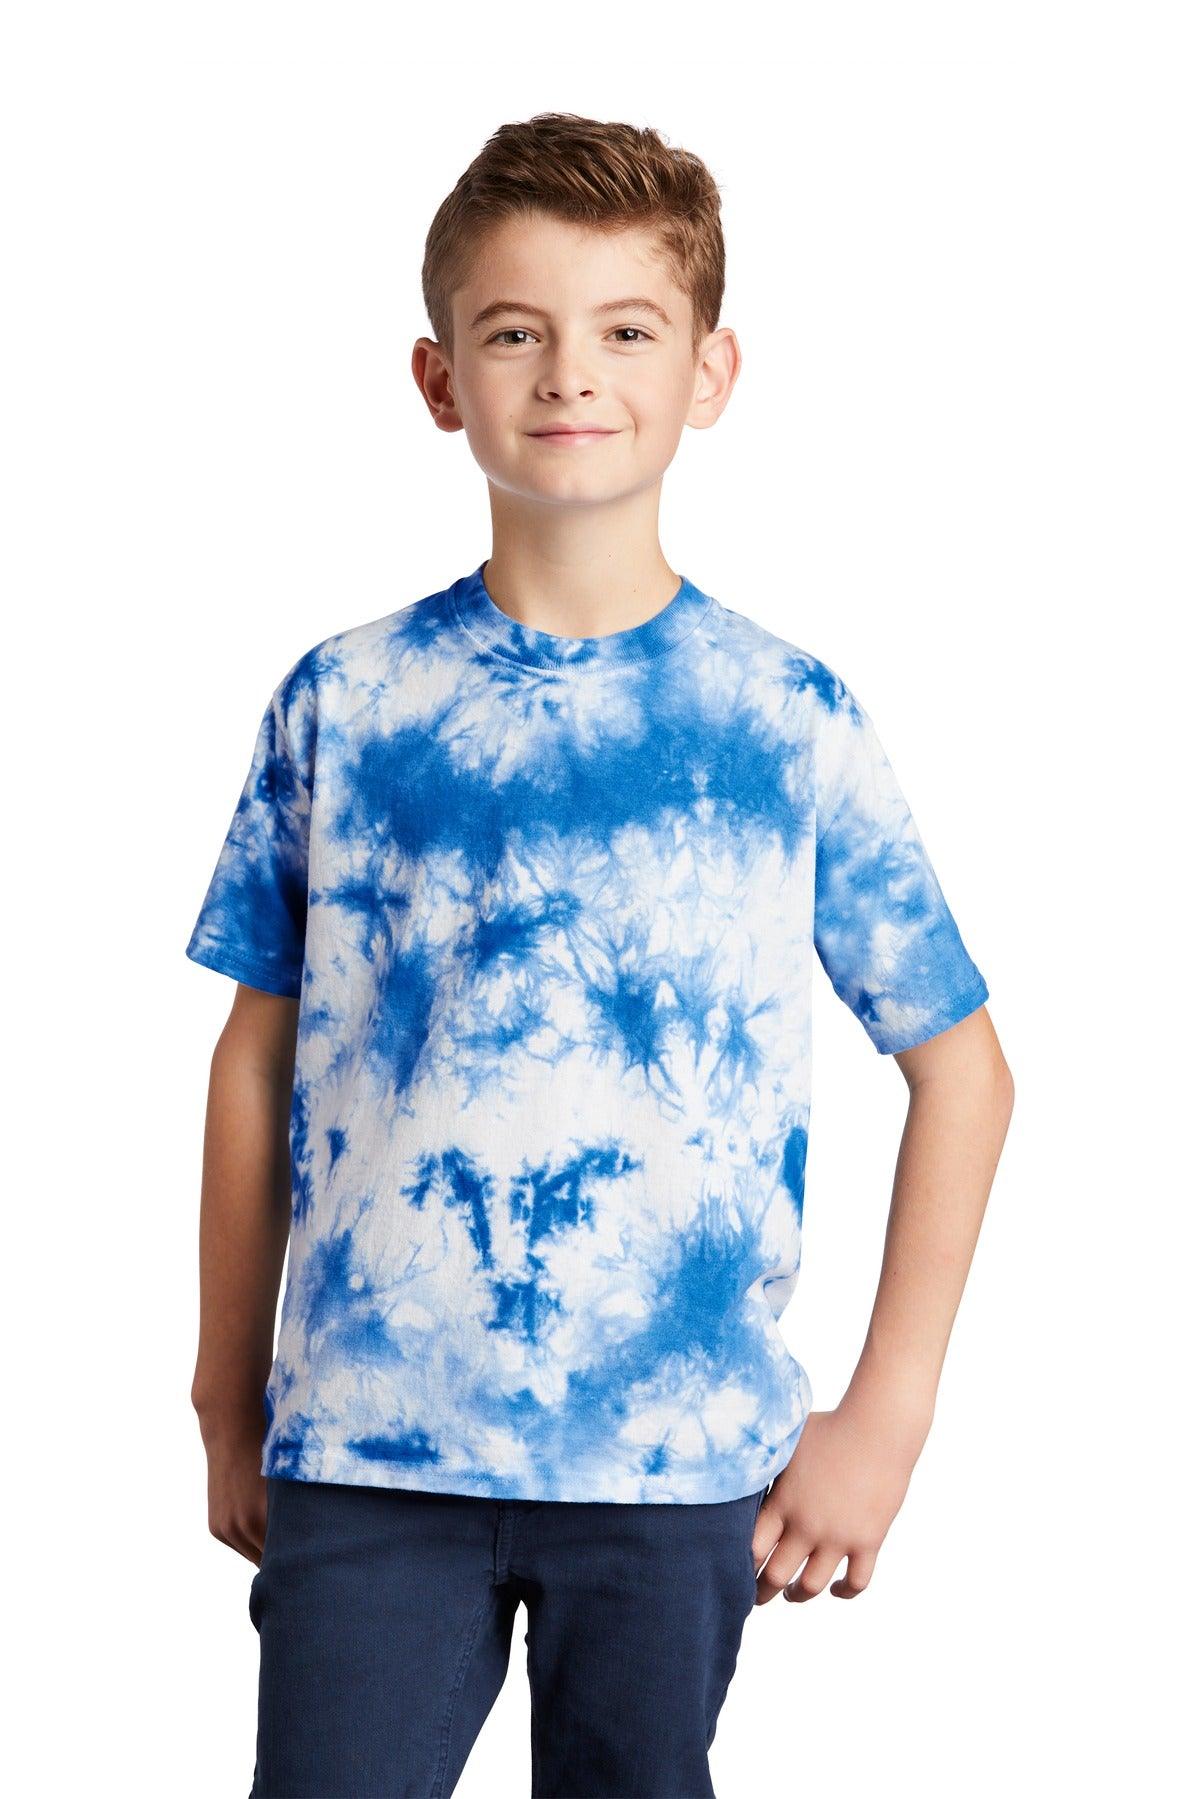 Port & Company Youth Crystal Tie-Dye Tee PC145Y - Dresses Max